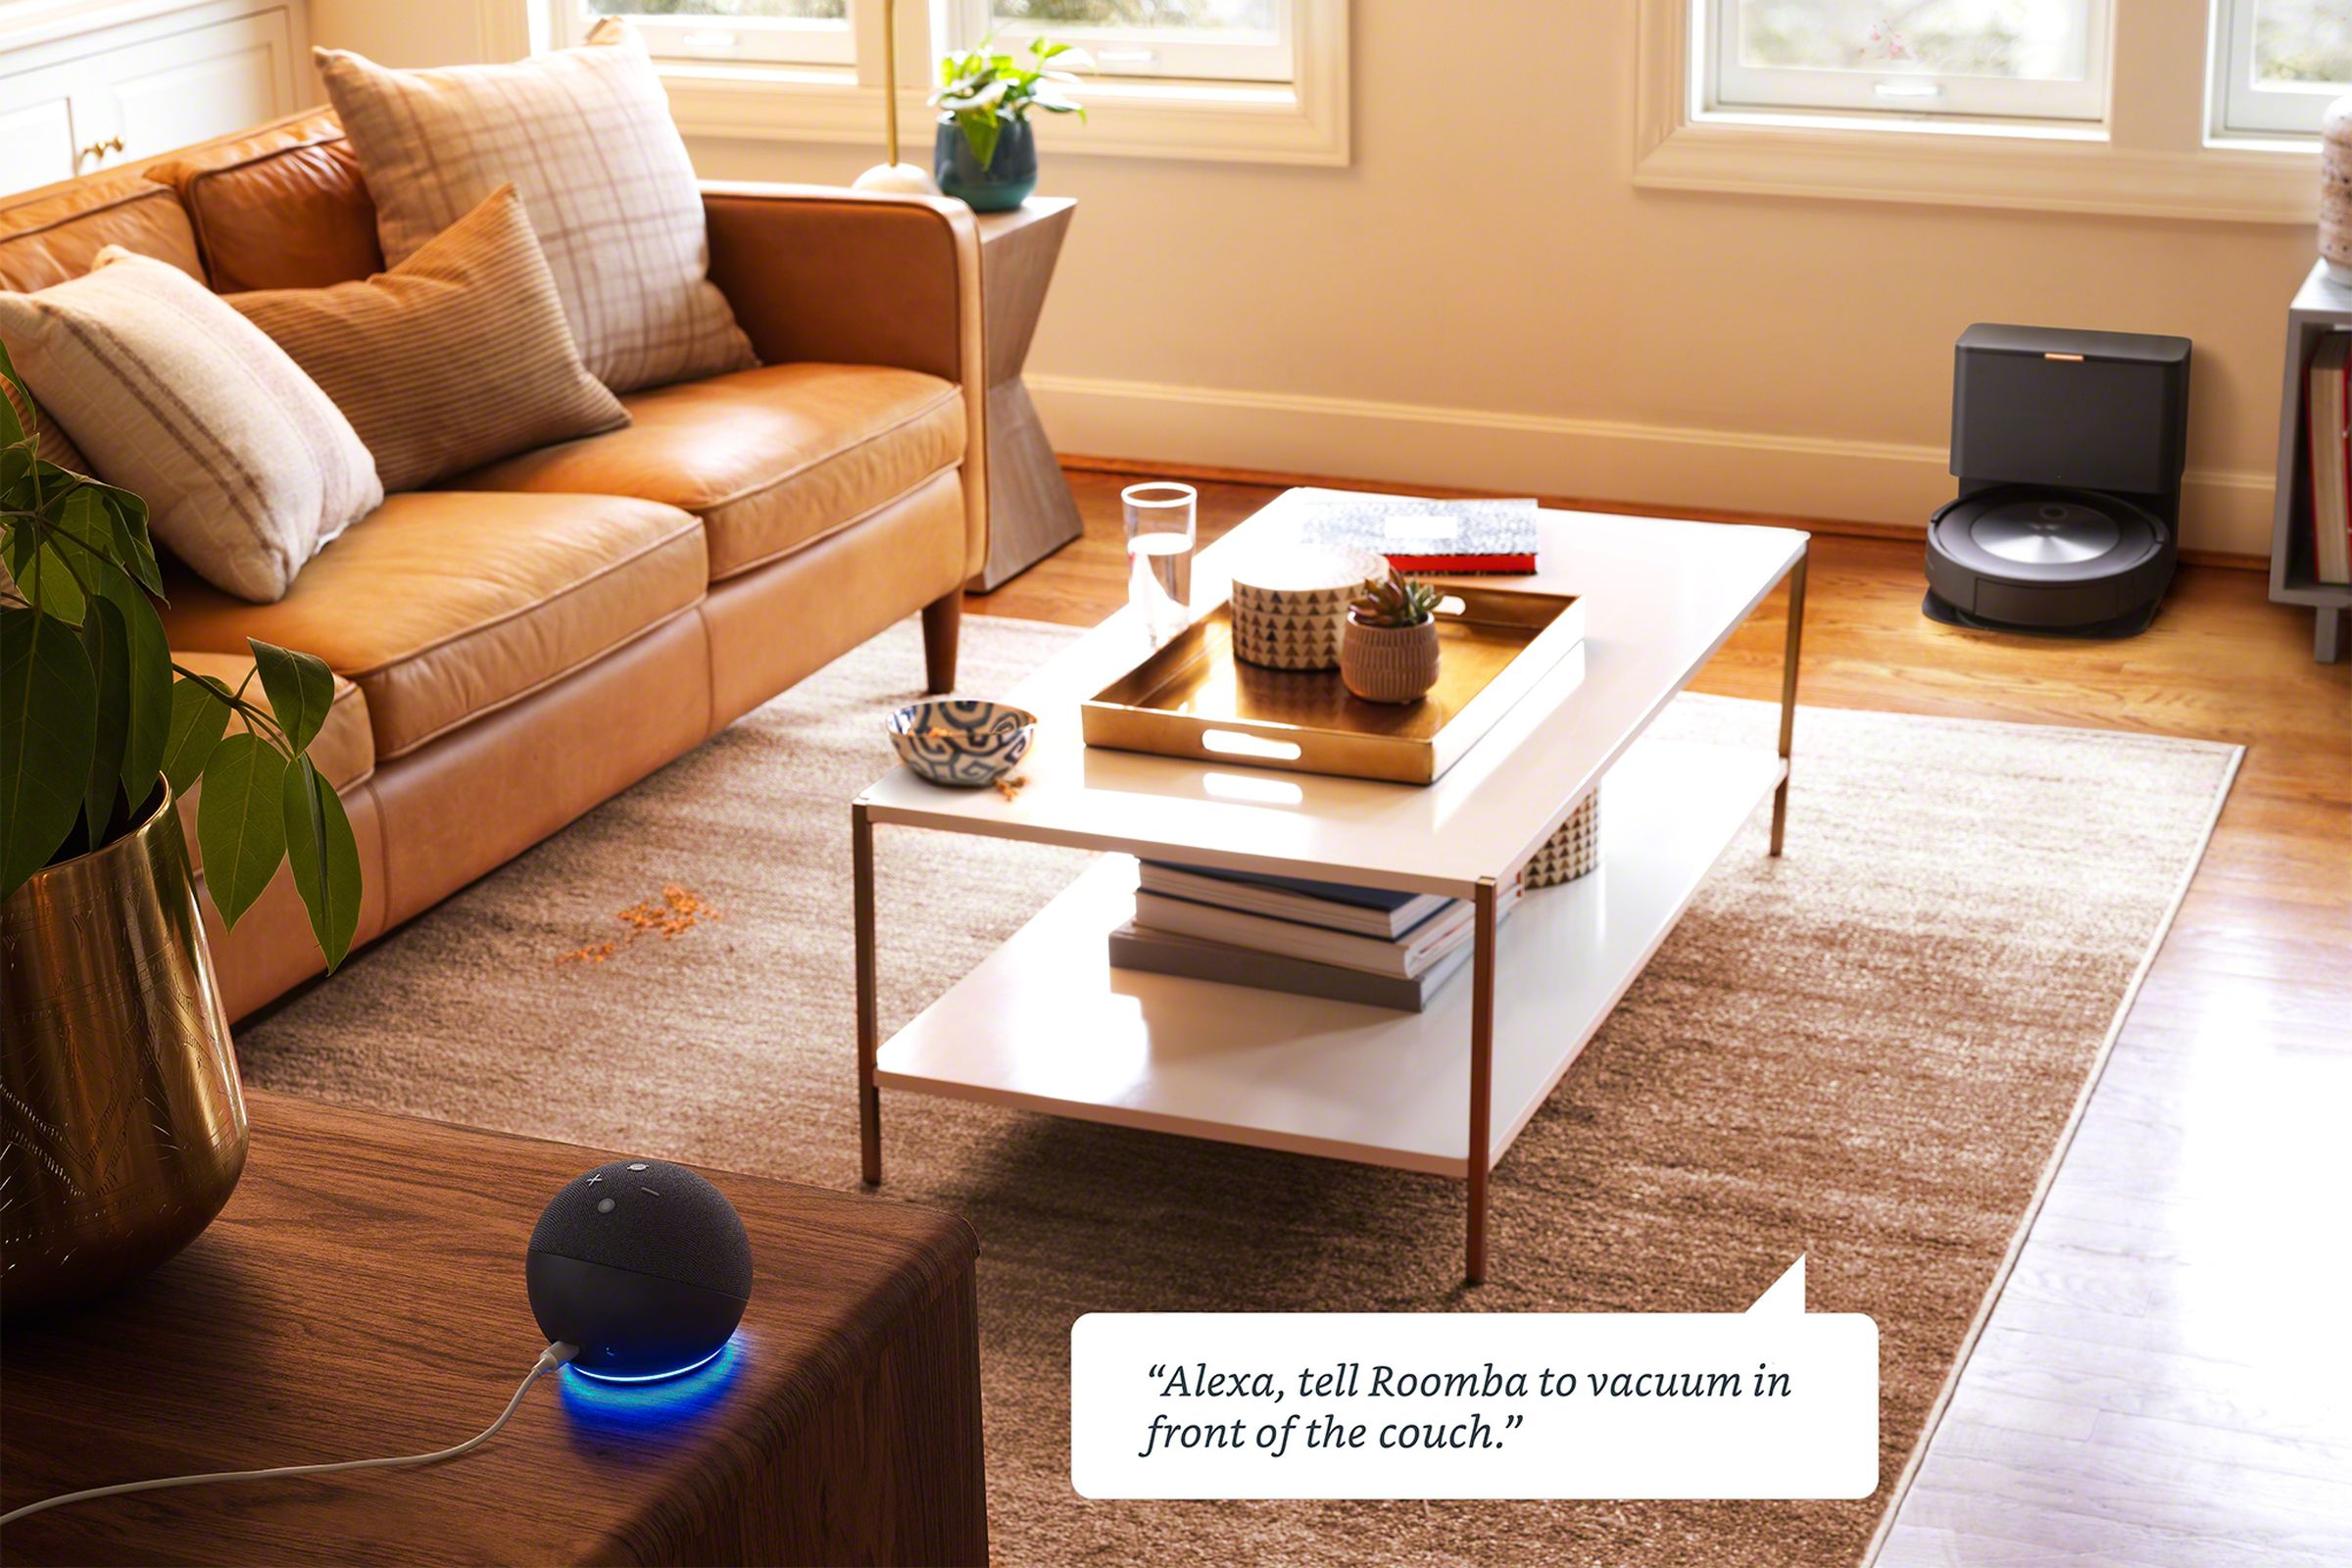 Its purchase of iRobot brings Amazon much-needed context for its ambient smart home ambitions.